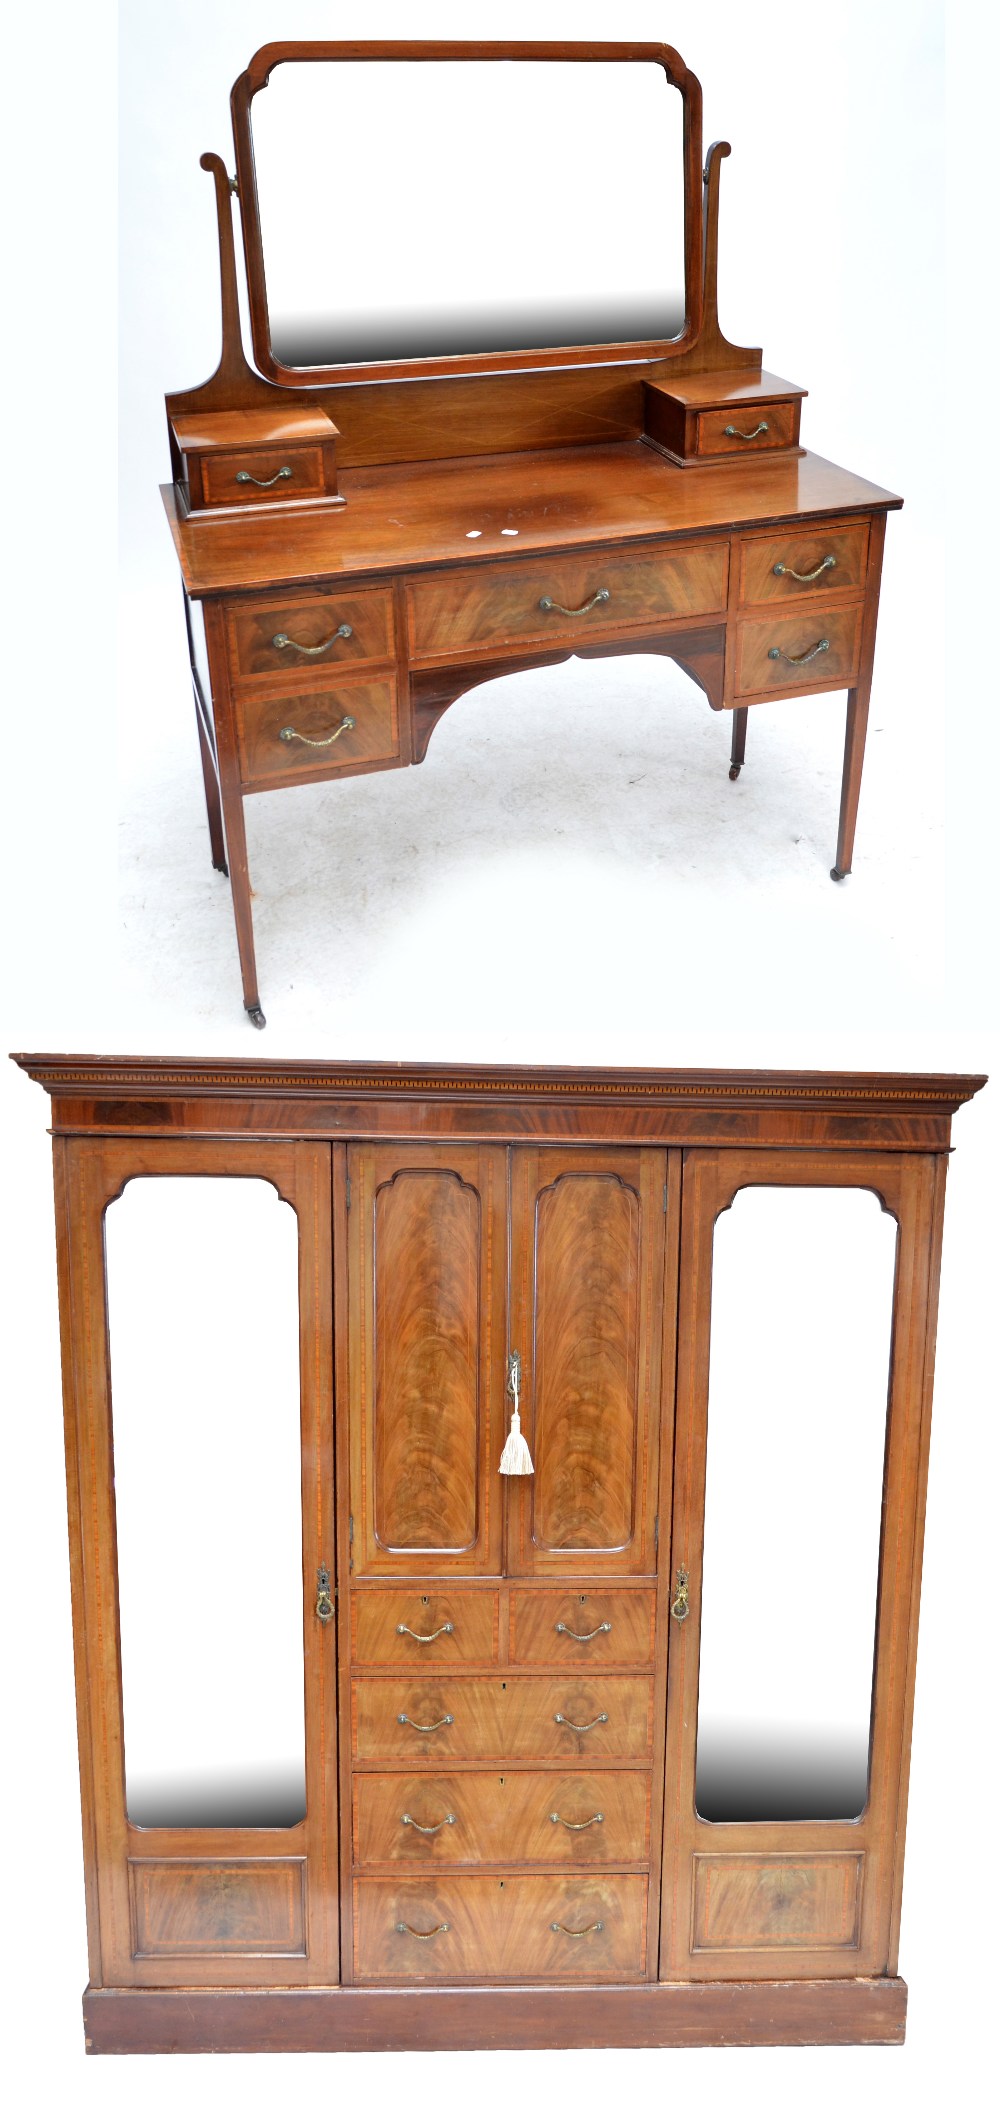 An Edwardian mahogany and inlaid mirrored wardrobe with matching dressing table (2).